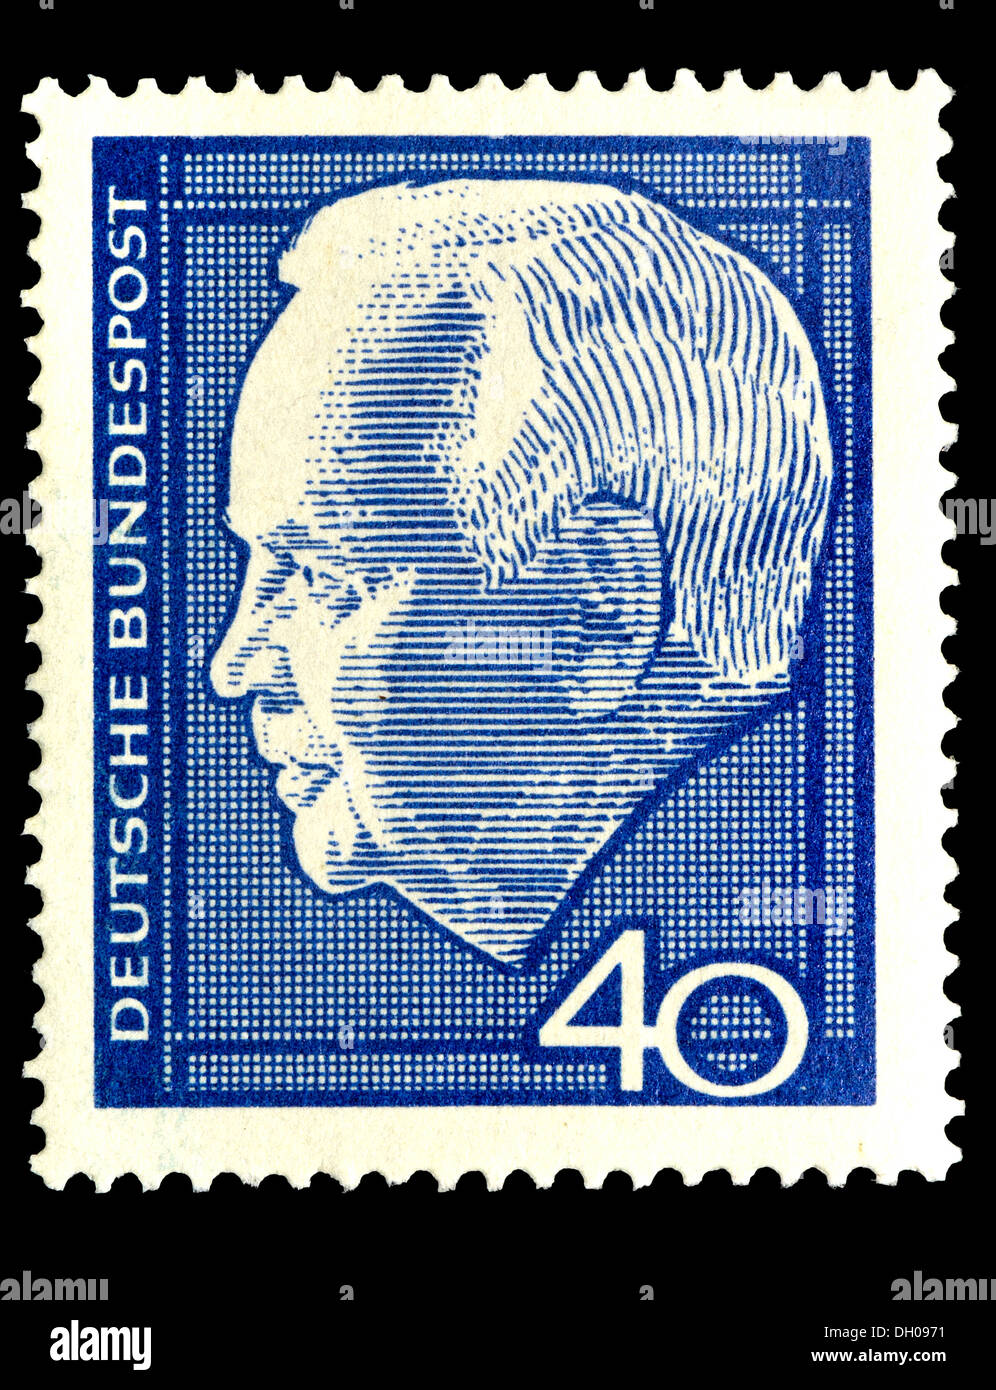 Portrait of Karl Heinrich Lübke (1894-1972: President of the Federal Republic of Germany 1959 -1969) on German postage stamp. Stock Photo